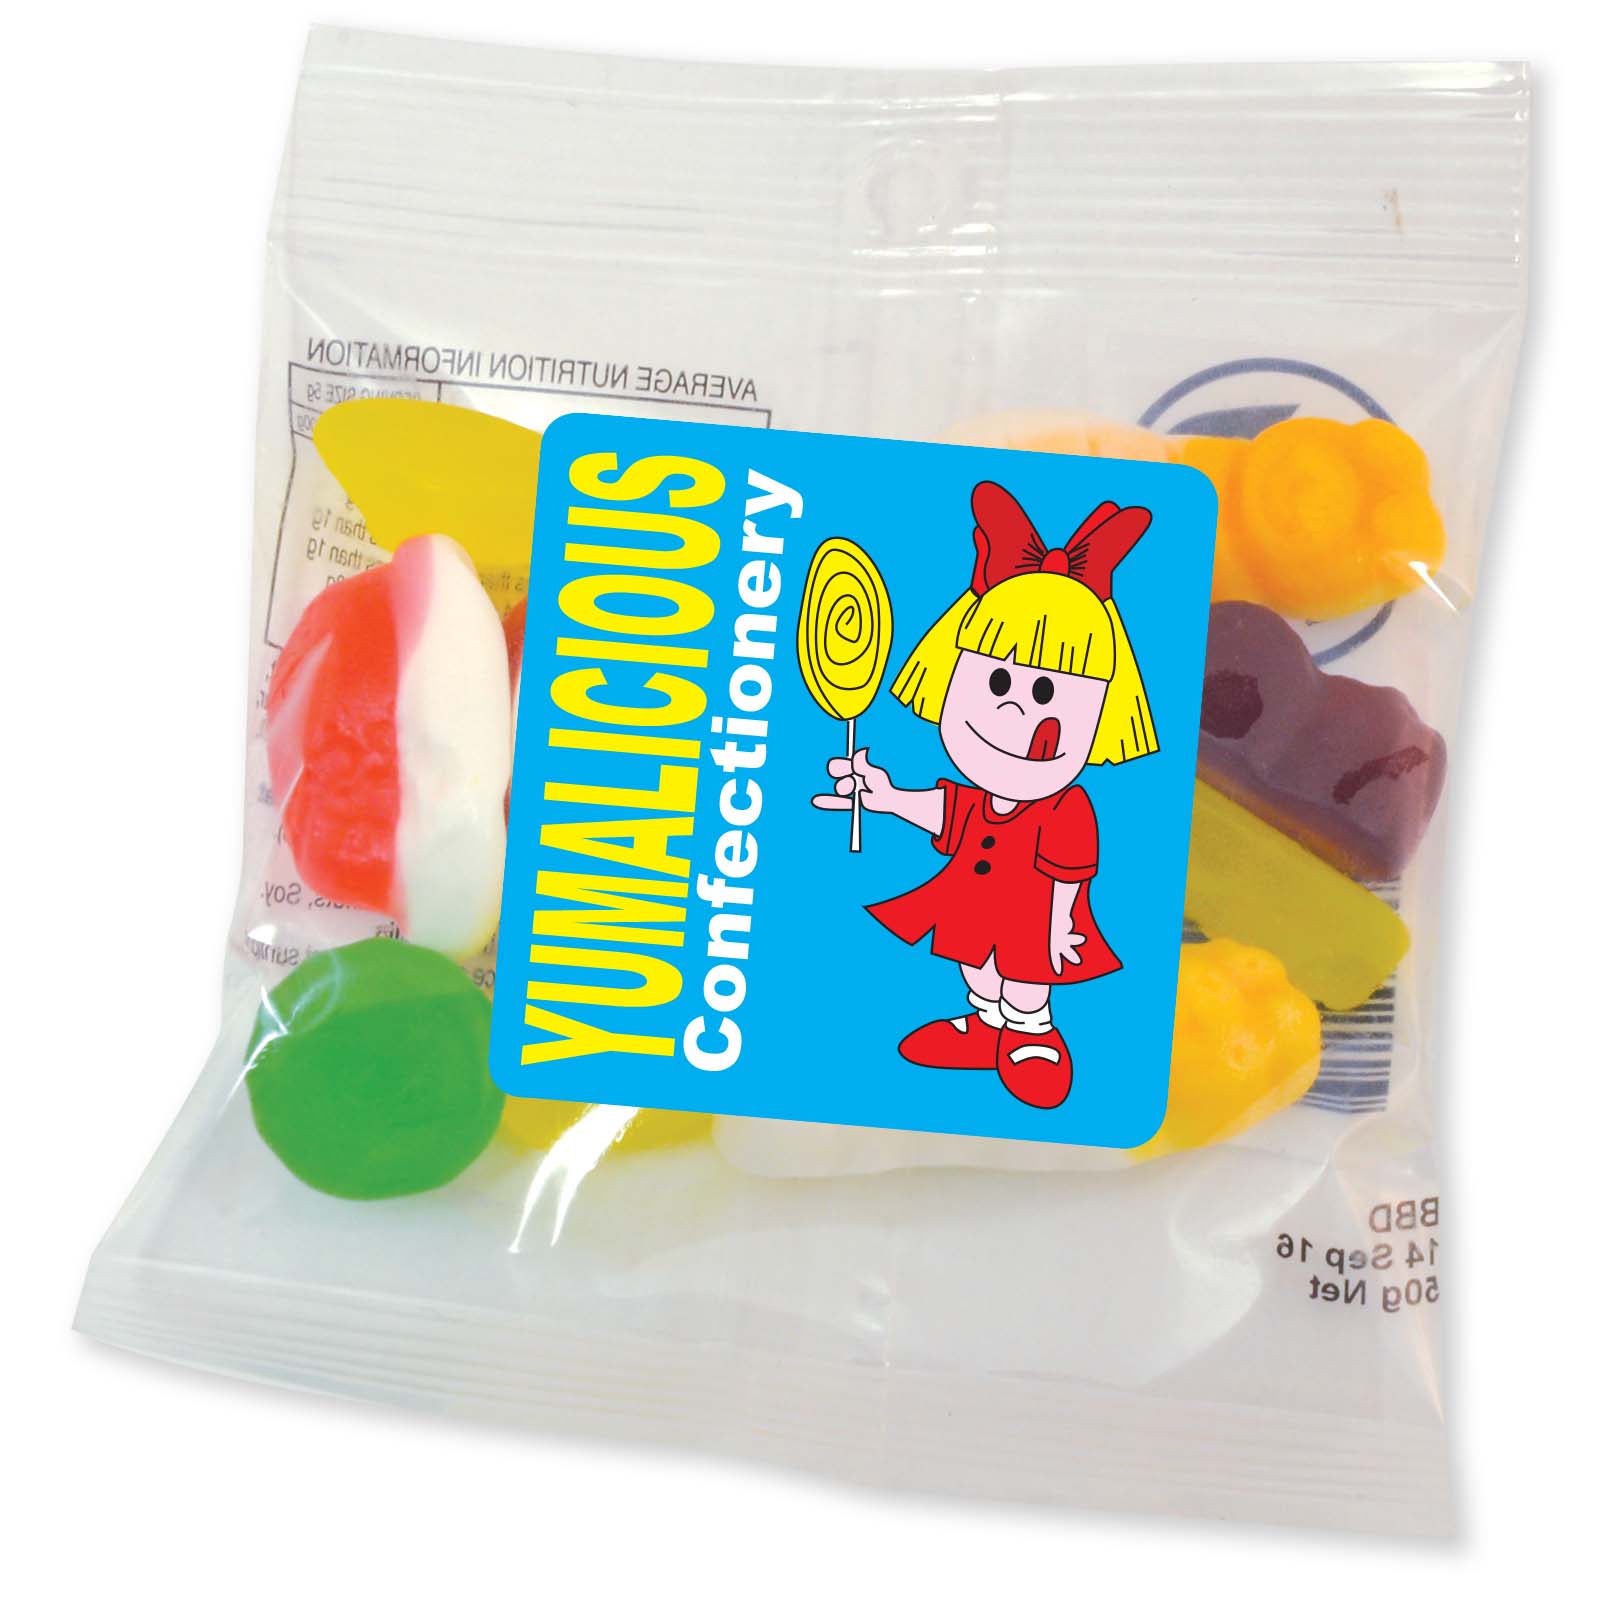 LL420 - Assorted Jelly Party Mix in 50 Gram Cello Bag